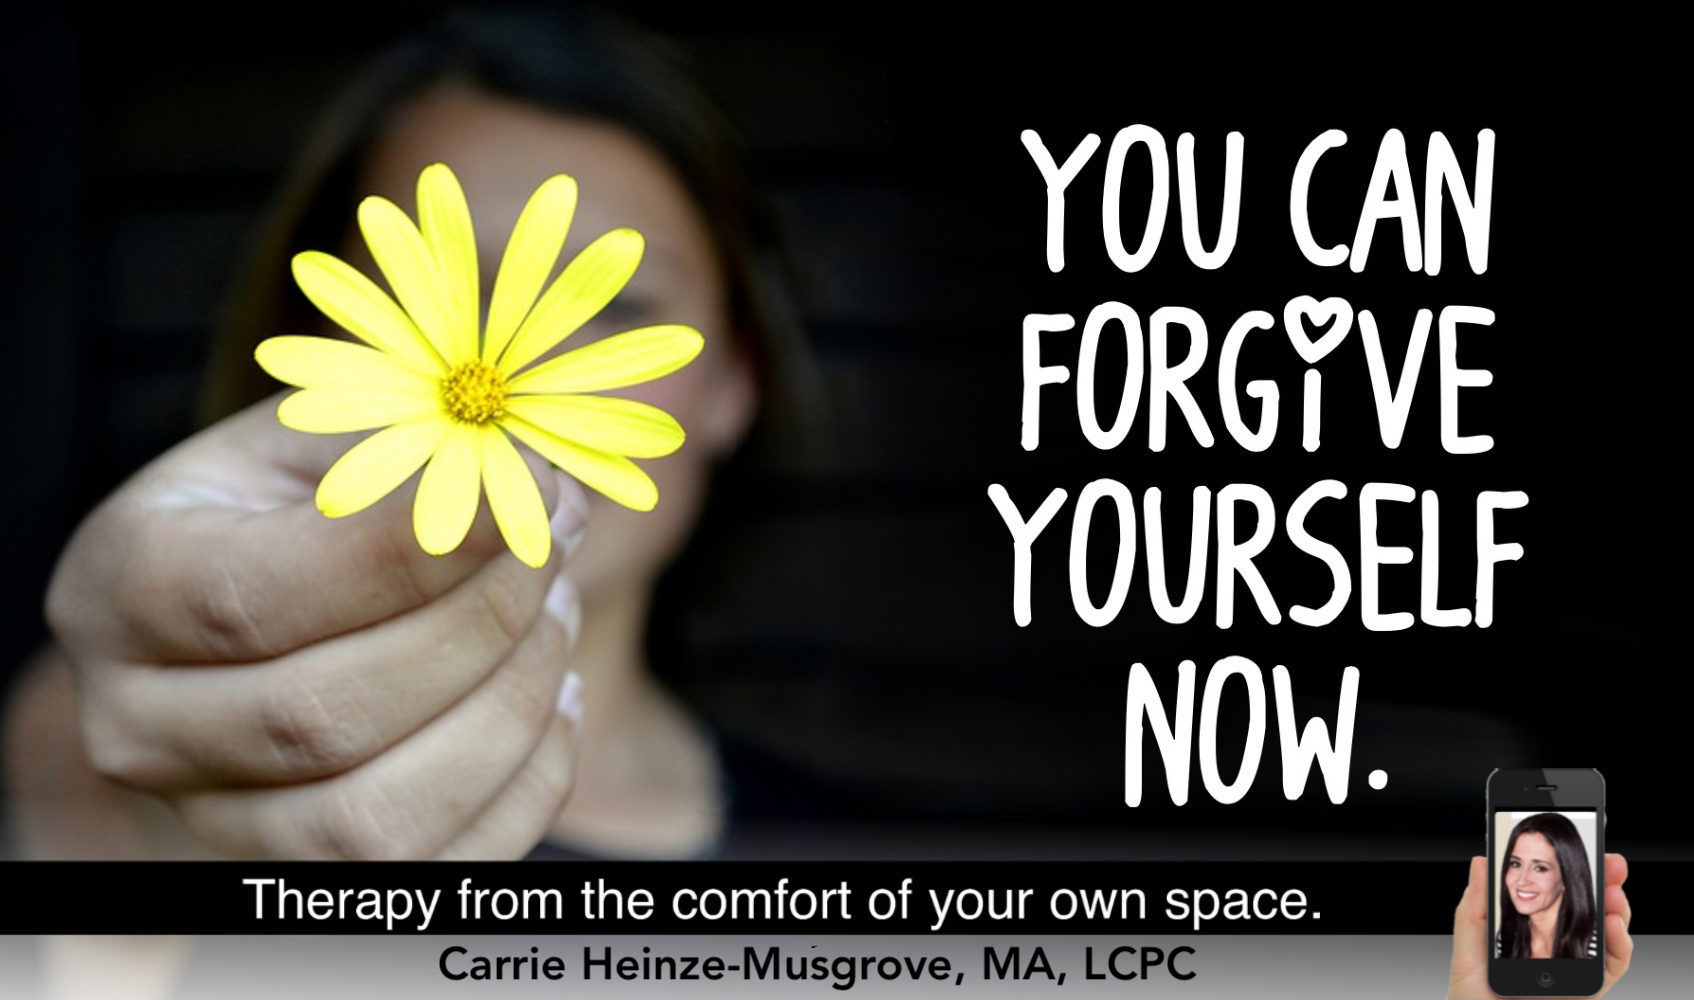 You Can Forgive Yourself Now.